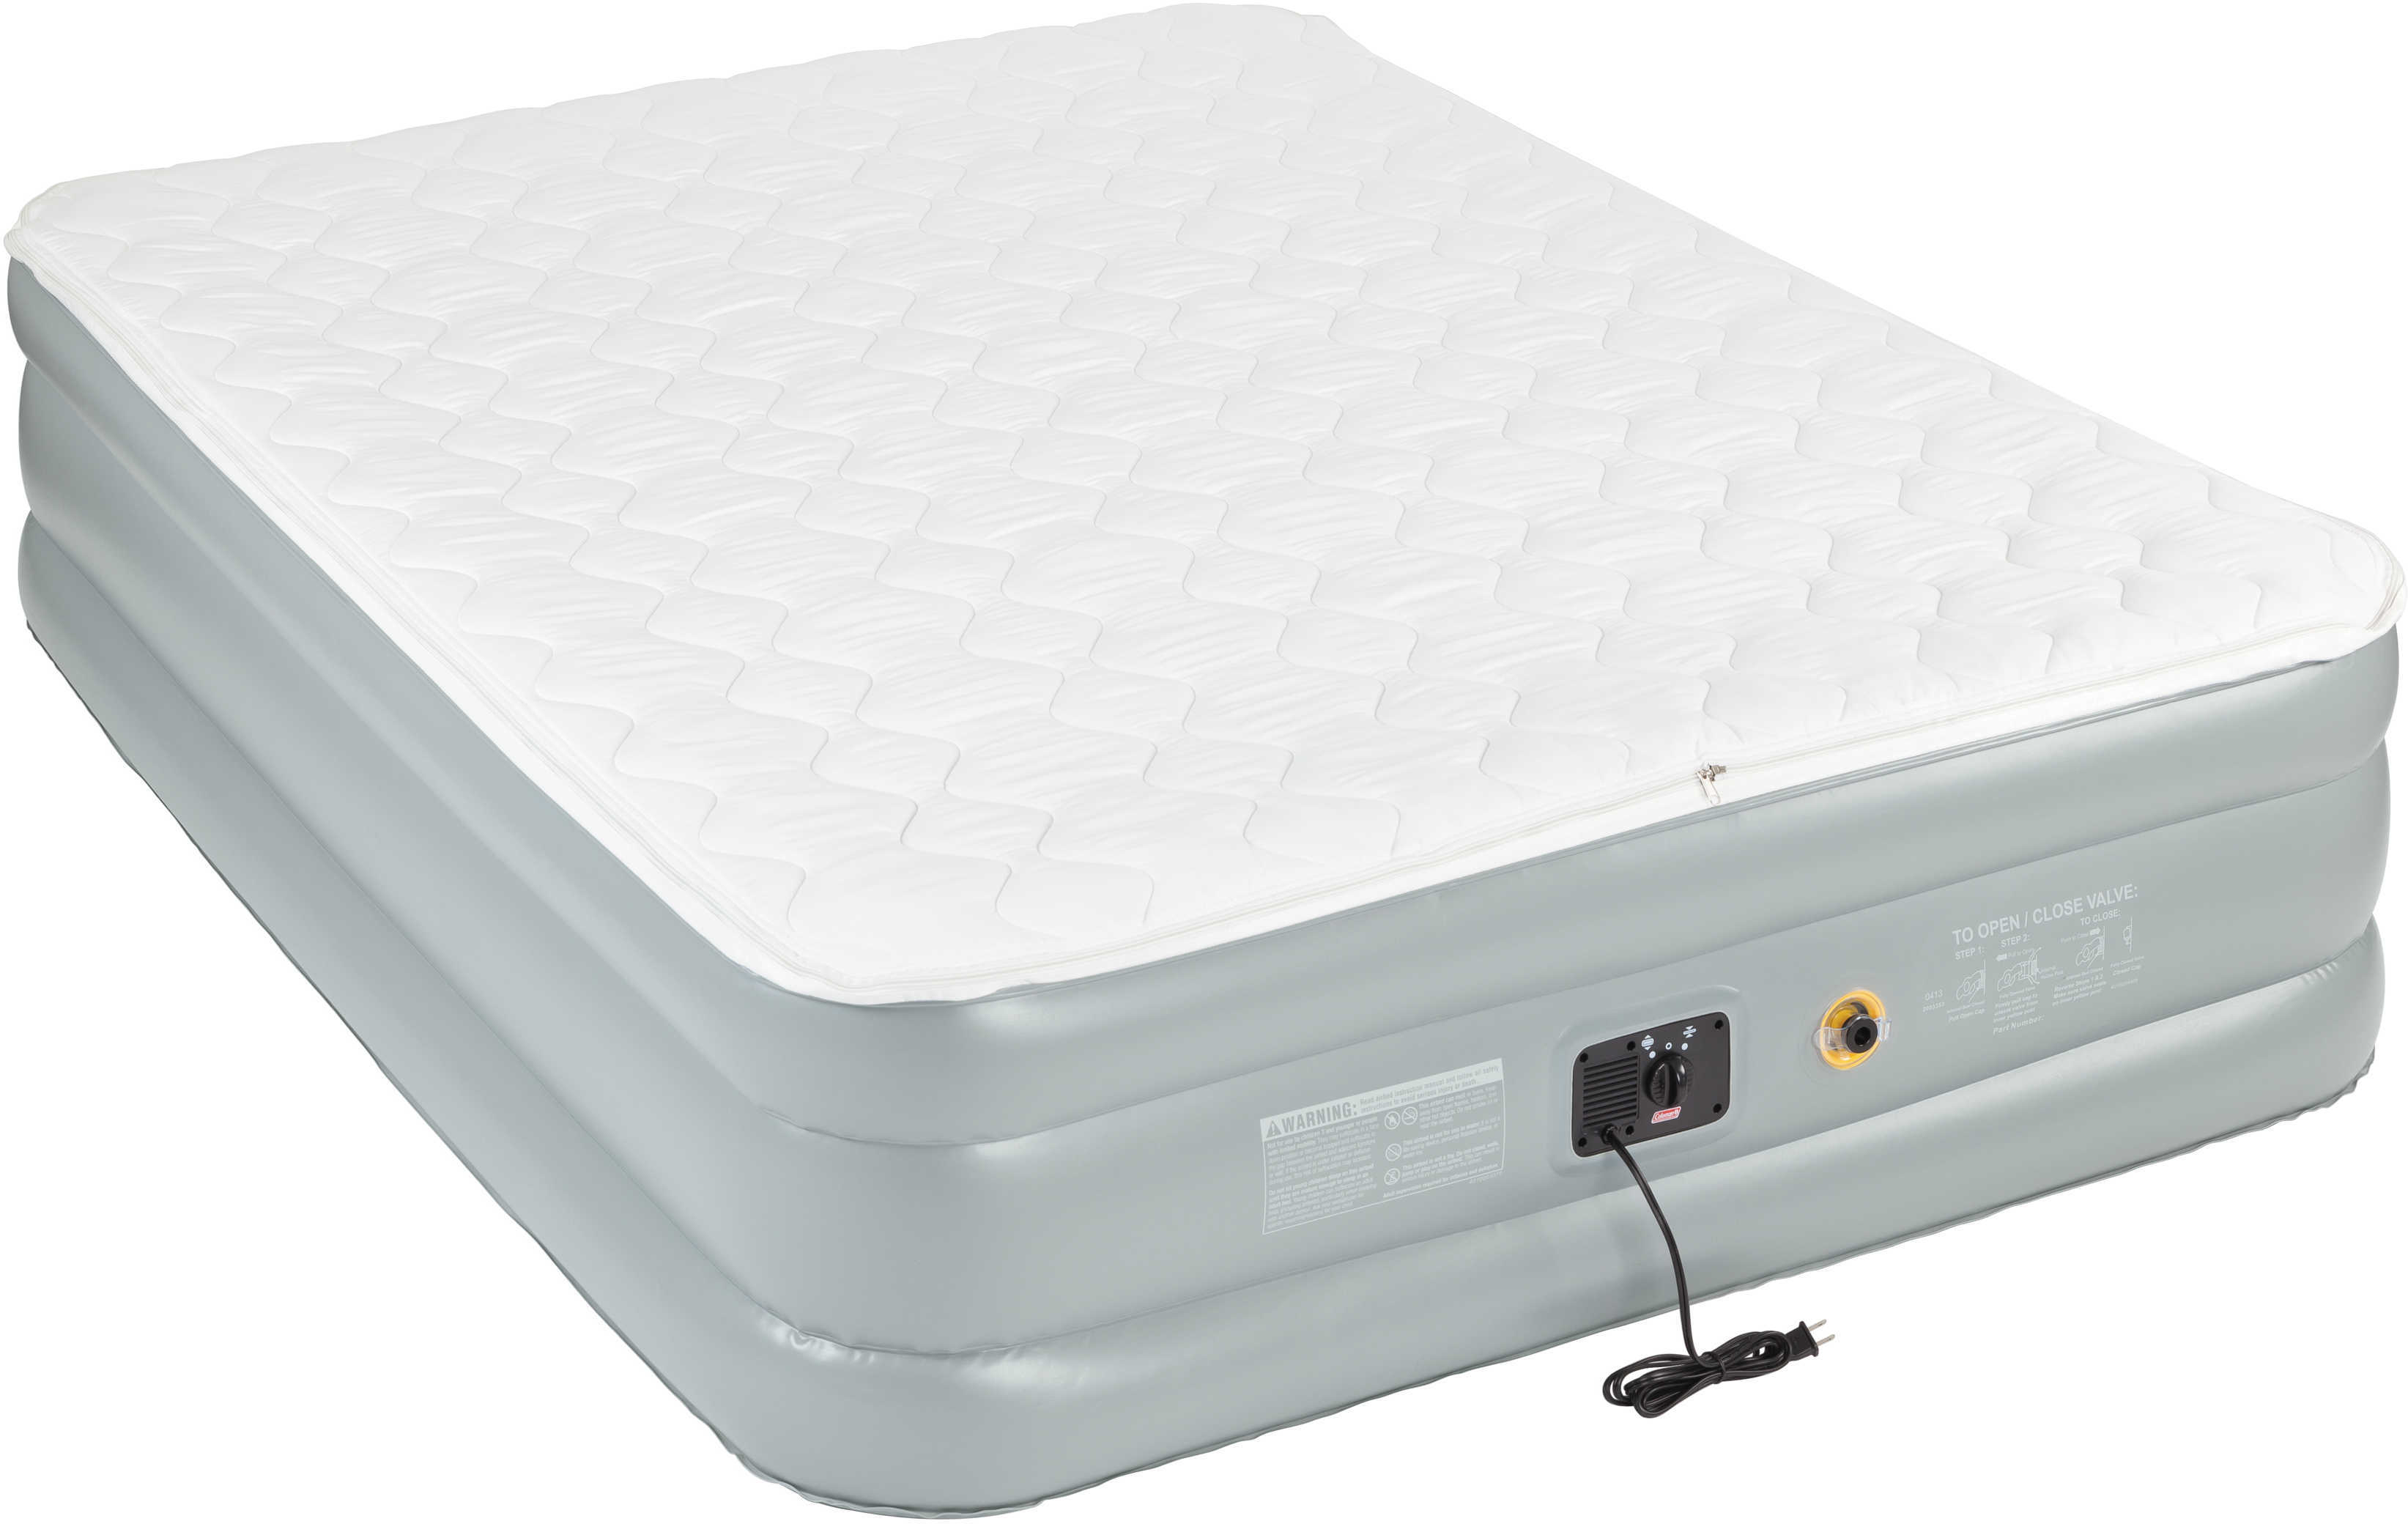 Coleman Airbed Queen, Double High, Pillowtop 120V, Built-In Pump Md: 2000025036